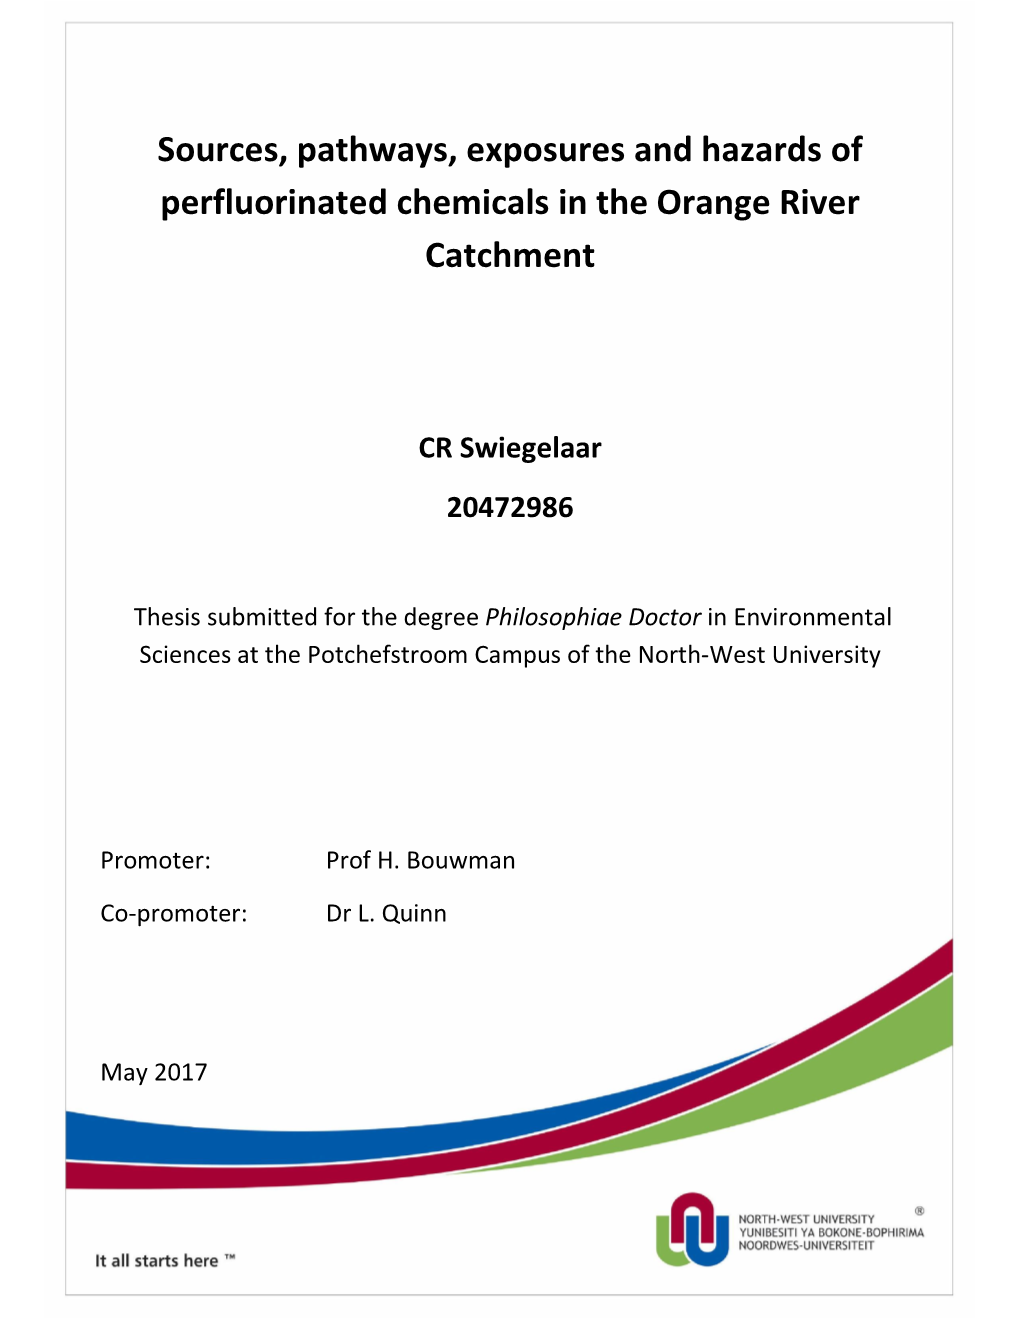 Sources, Pathways, Exposures and Hazards of Perfluorinated Chemicals in the Orange River Catchment